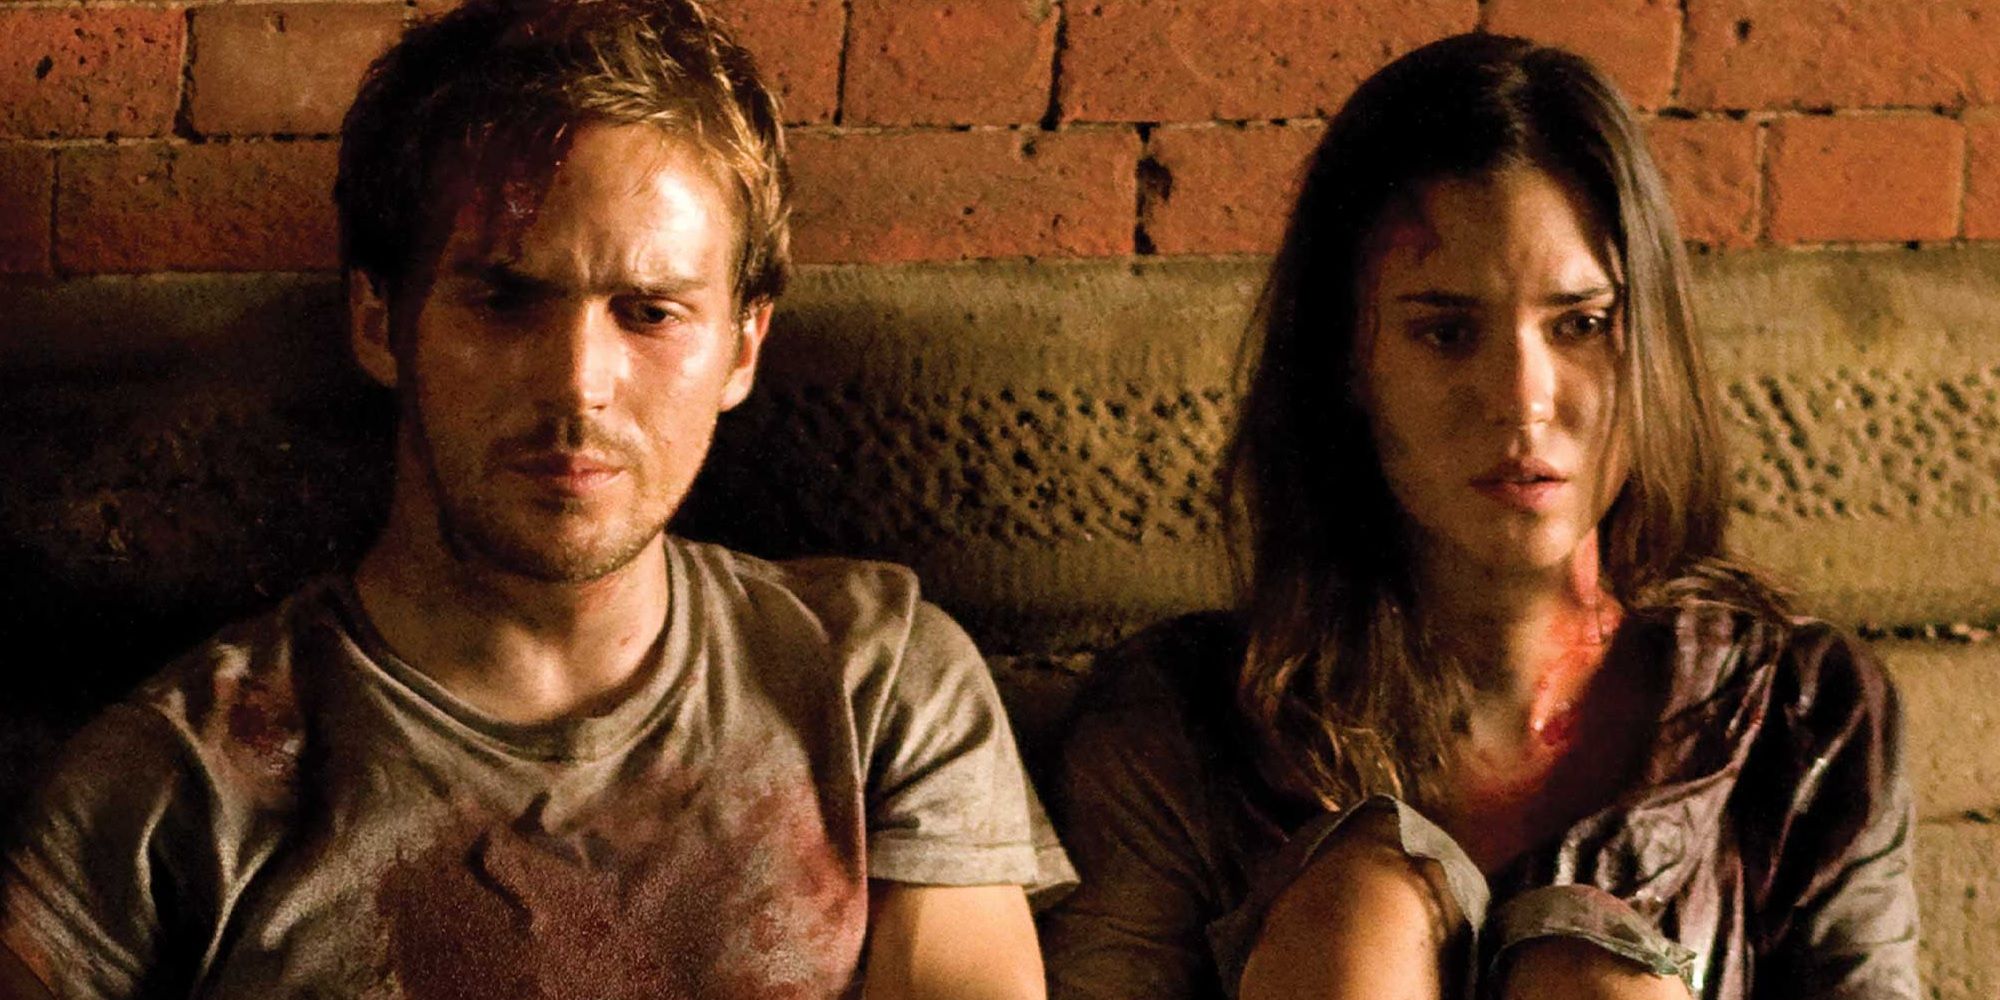 Rob and Beth looking mortified against a brick backdrop in Cloverfield